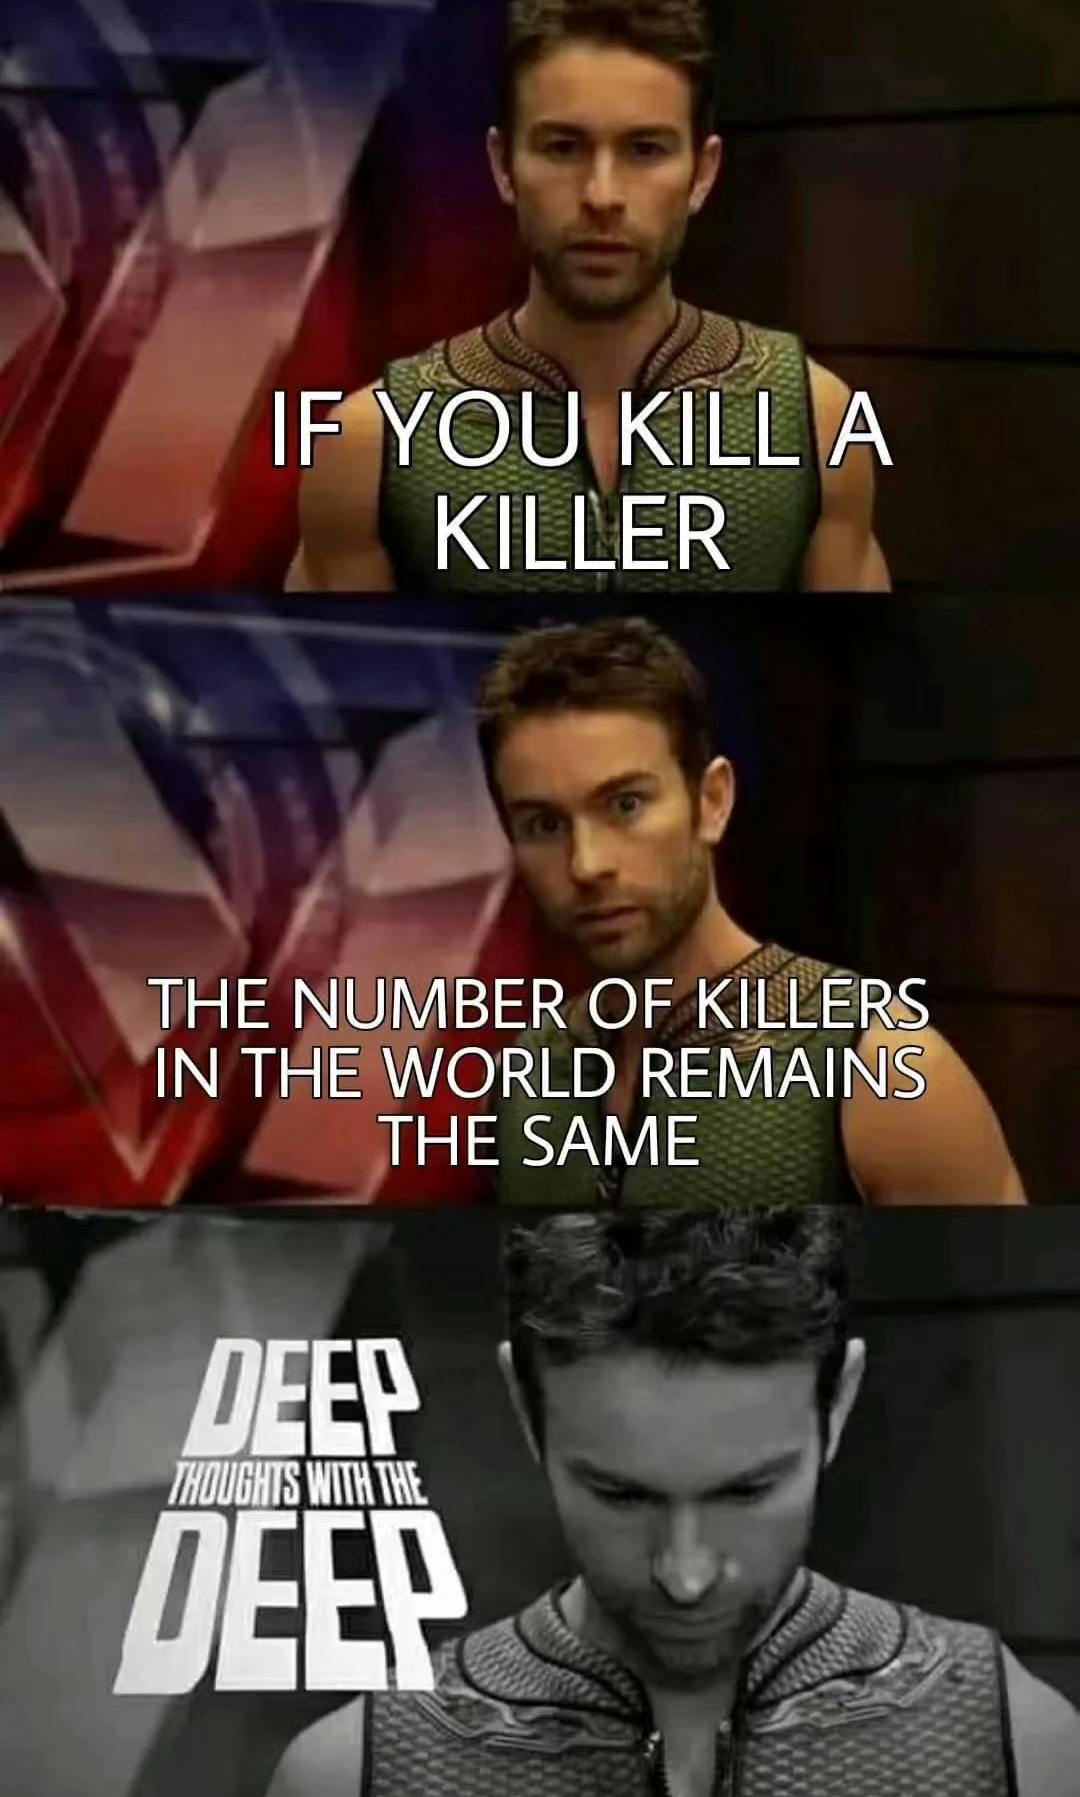 deep thoughts with the deep meme that reads 'if you kill a killer the number of killers in the world remains the same'